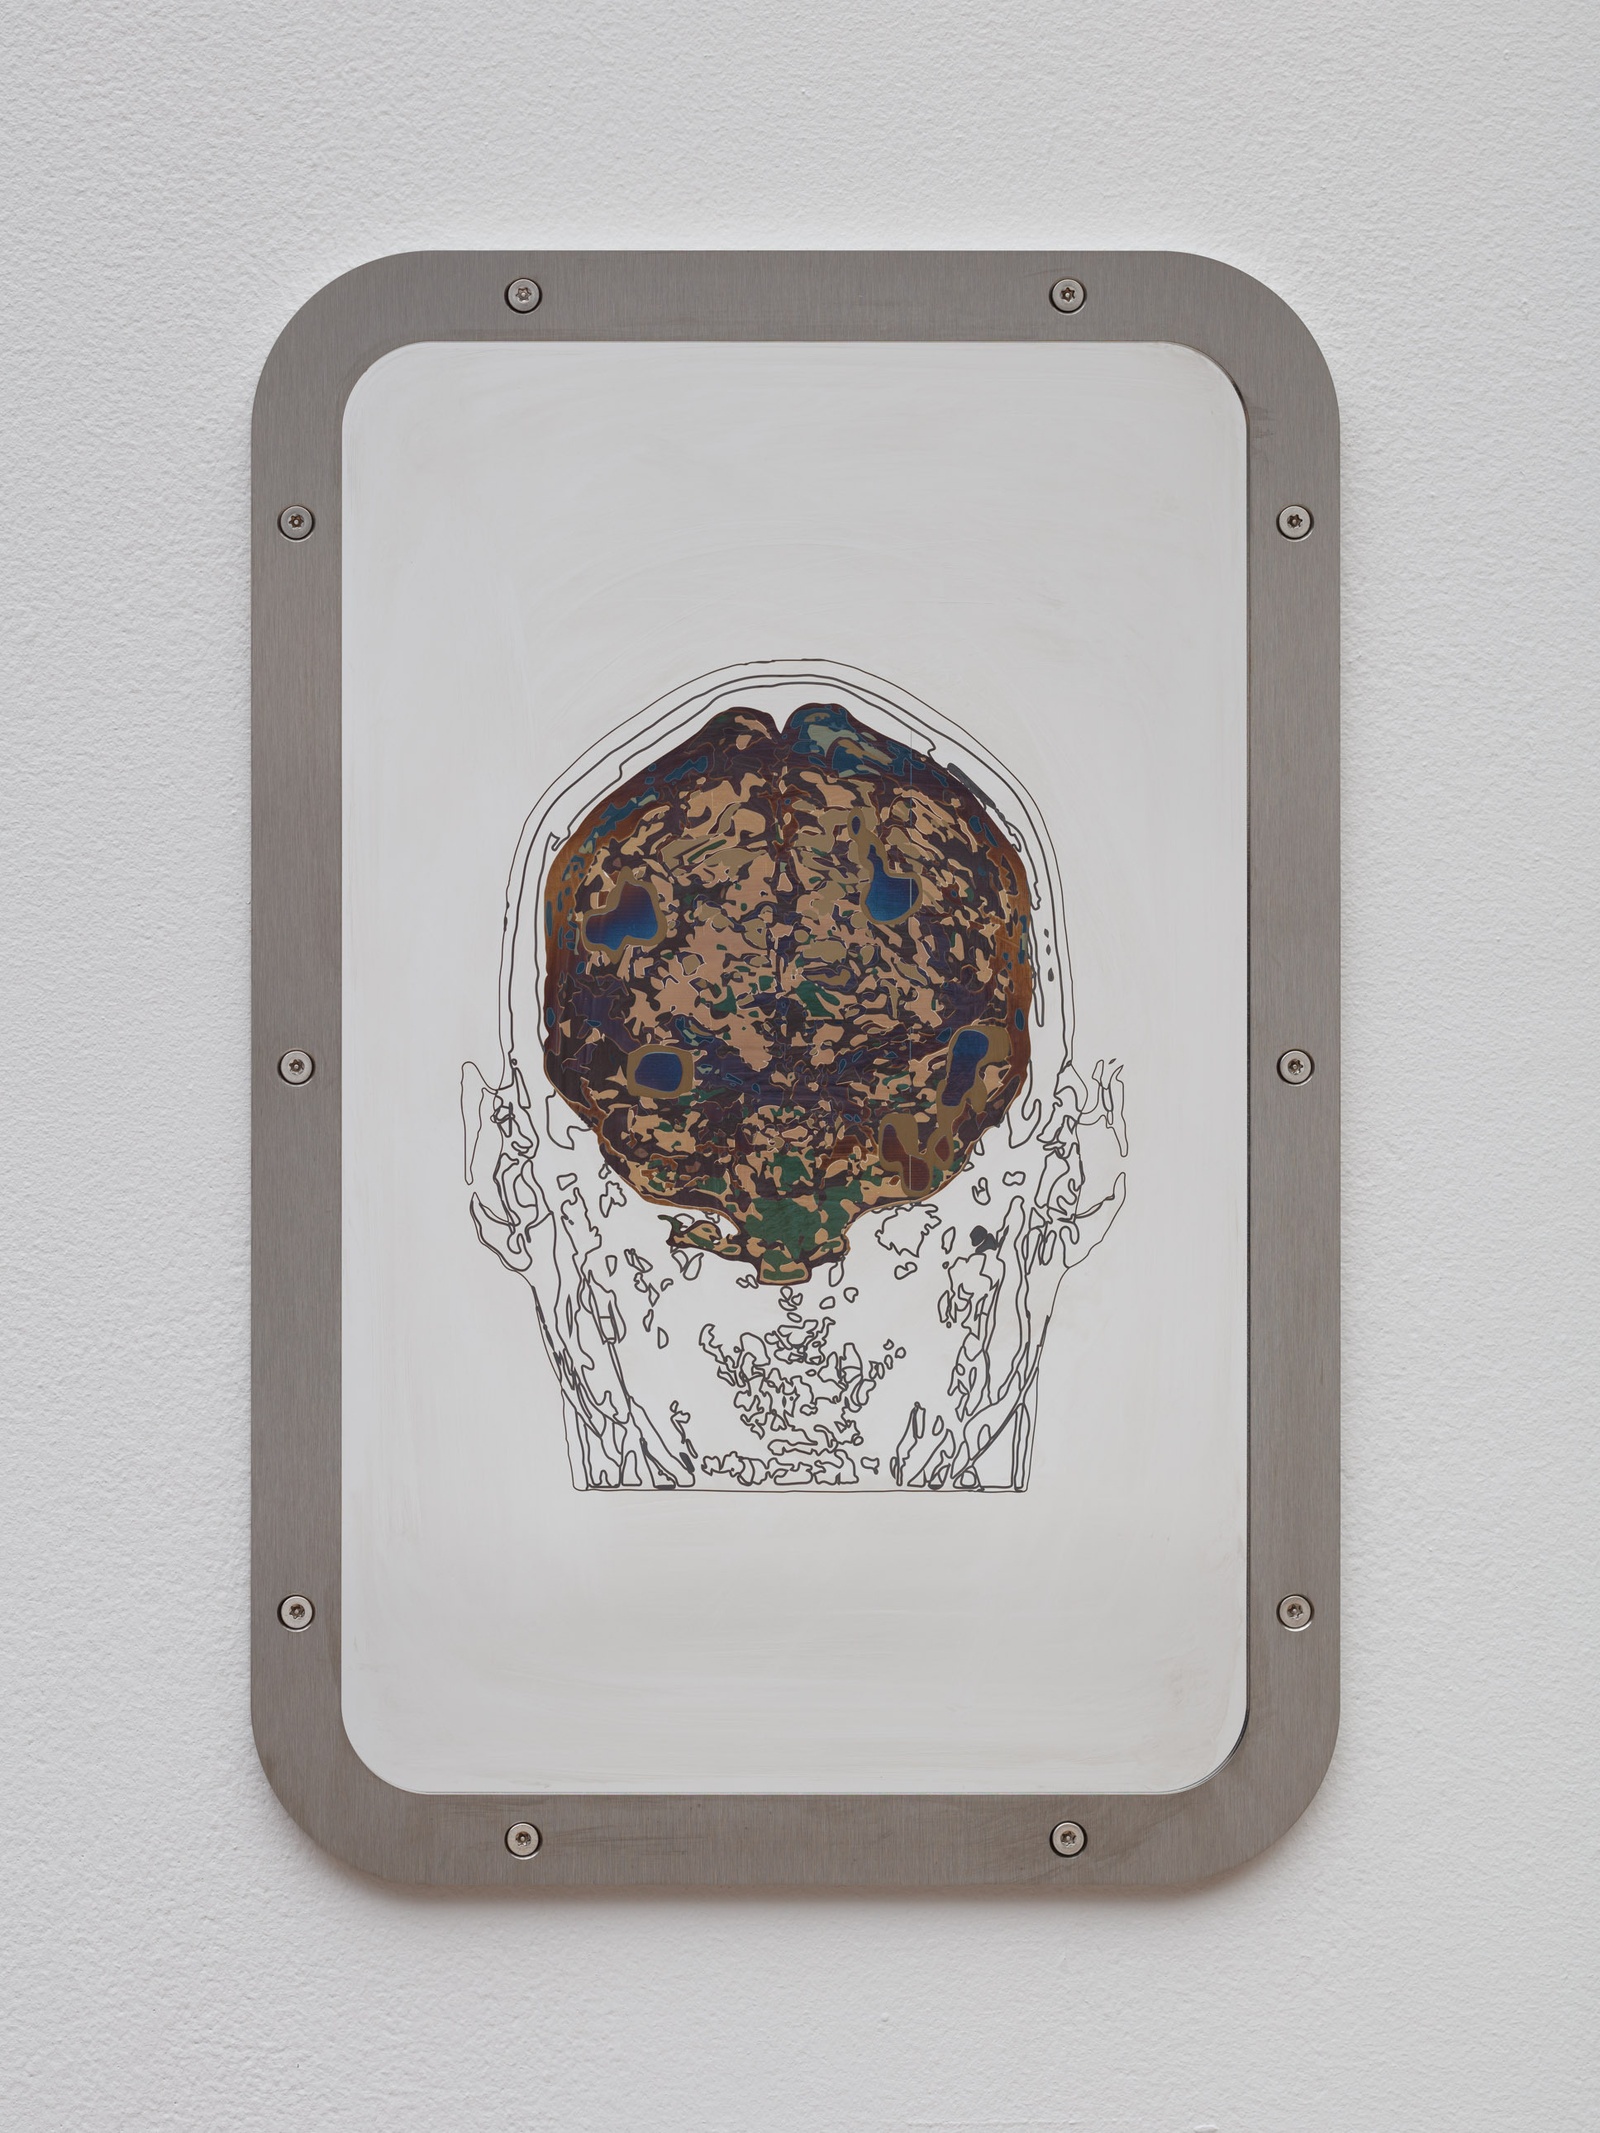 Exposure to Havana Syndrome (MRI/back), Self-Portrait, 2020laser engraving on stainless steel prison mirror45 x 30 cm | 17 3/4 x 11 3/4 in